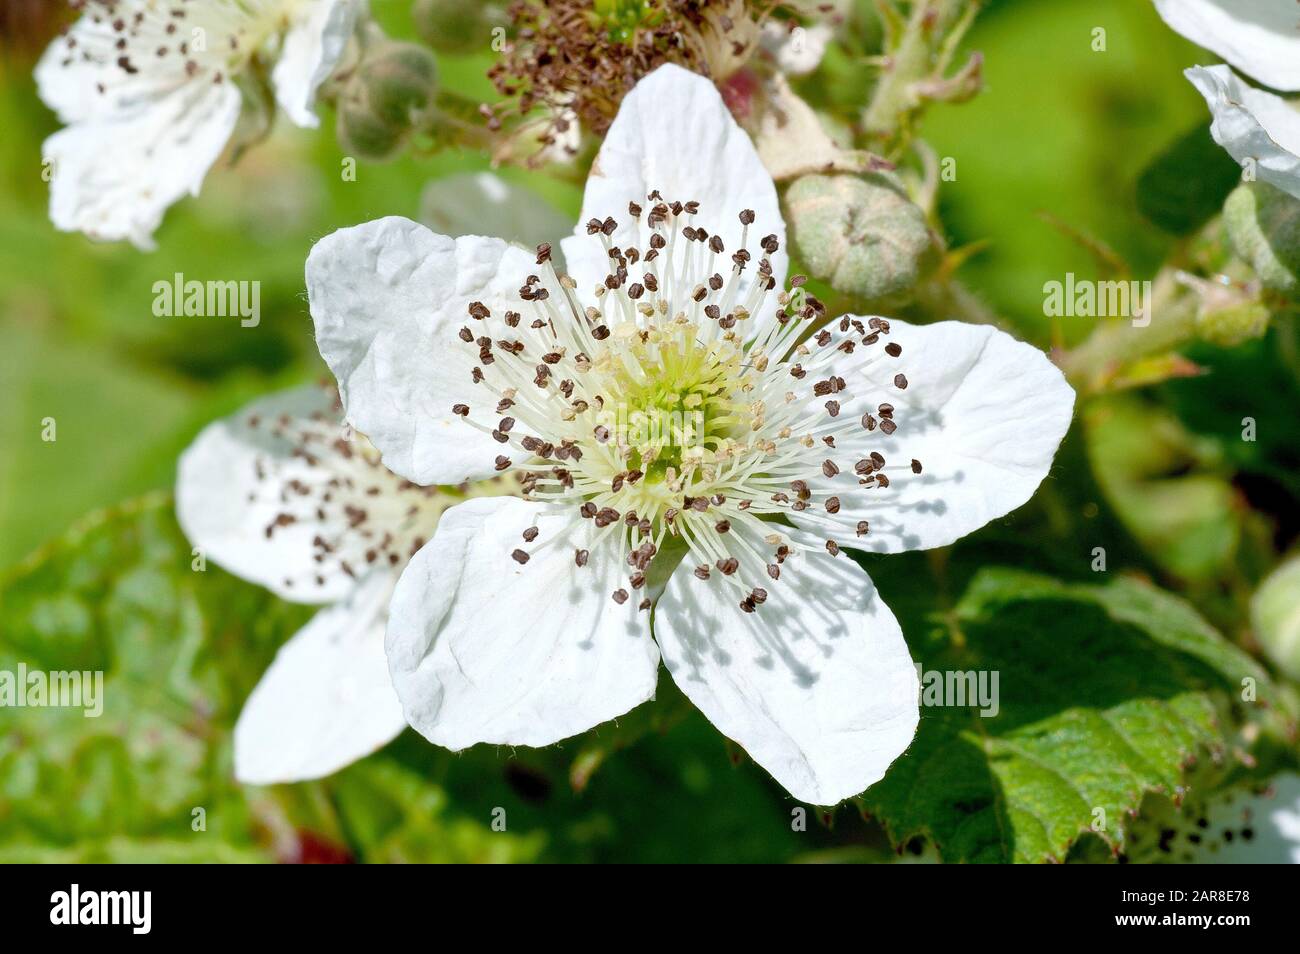 Bramble or Blackberry (rubus fruticosus), close up of a single fully open flower showing detail of the stigma and stamens. Stock Photo